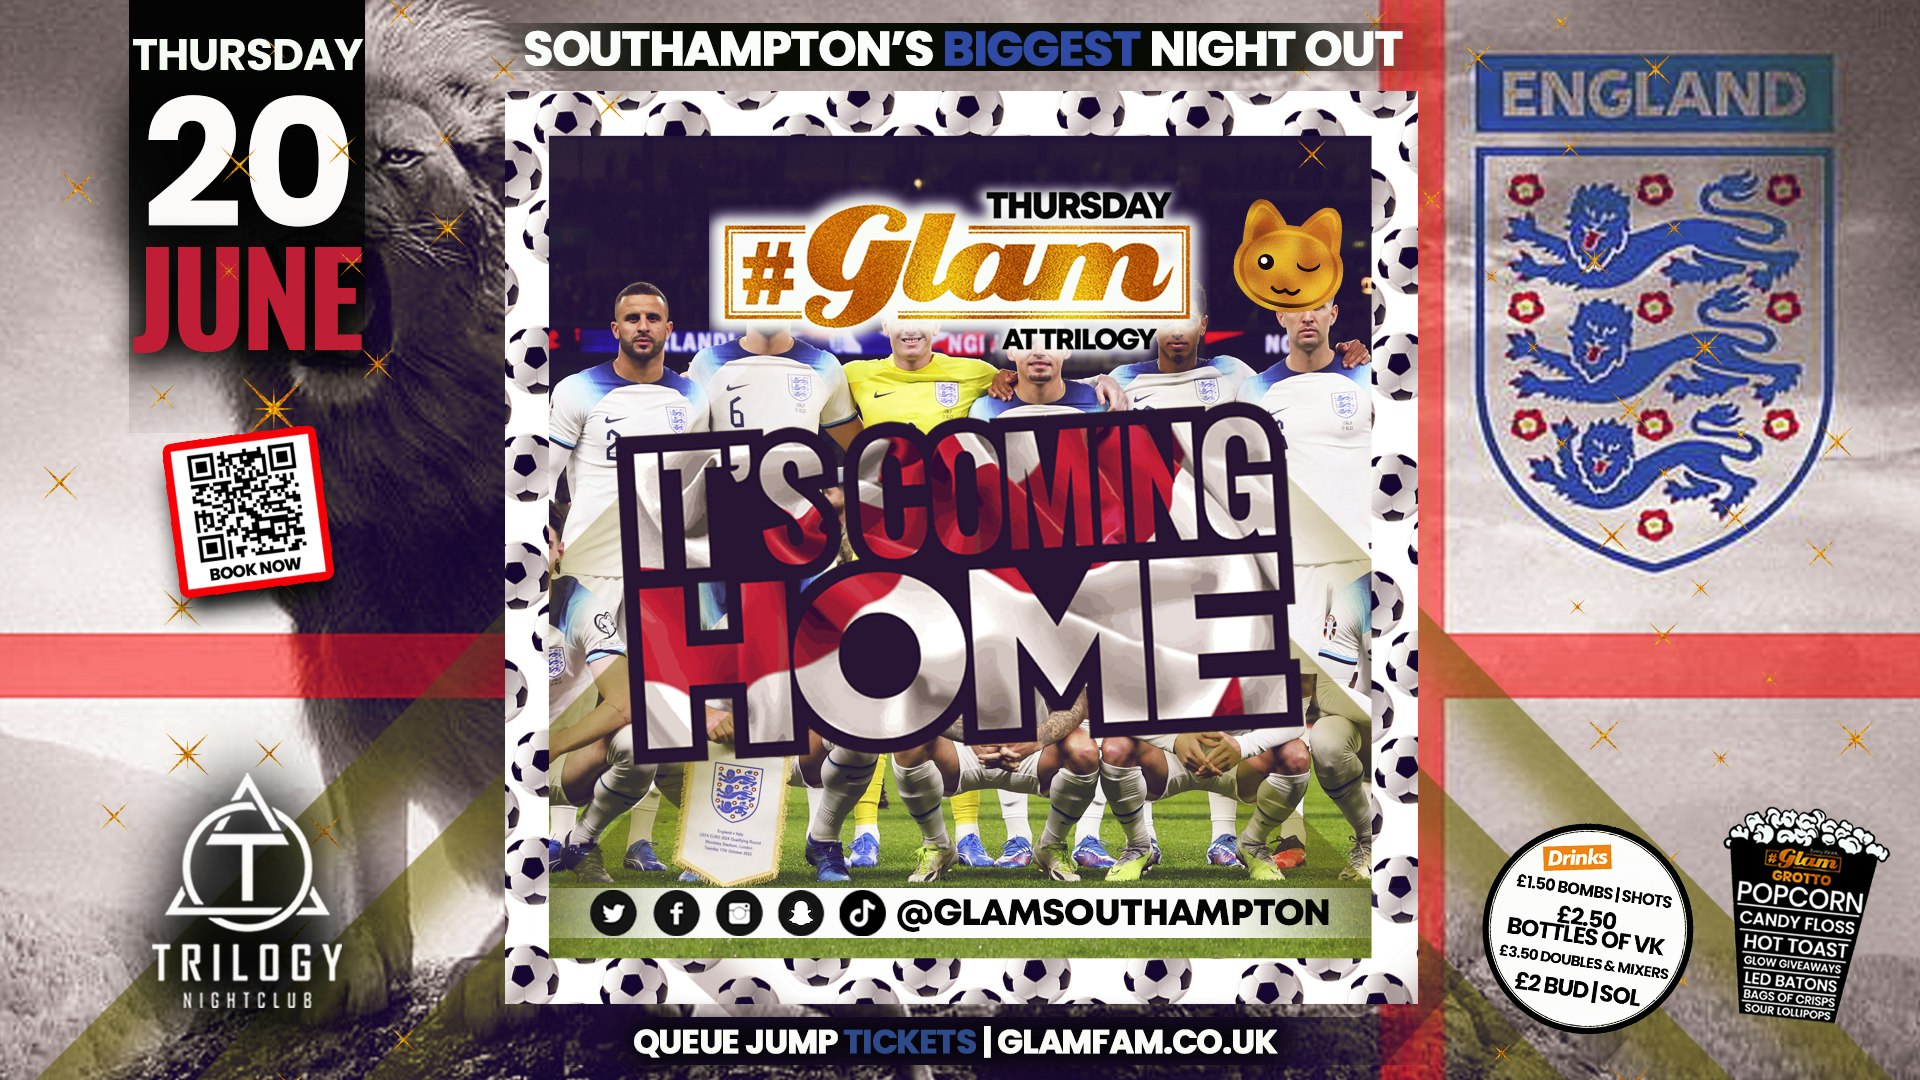 Glam – IT’S COMING HOME! THREE LIONS PARTY! 🦁🦁🦁 Thursdays at Trilogy 😻